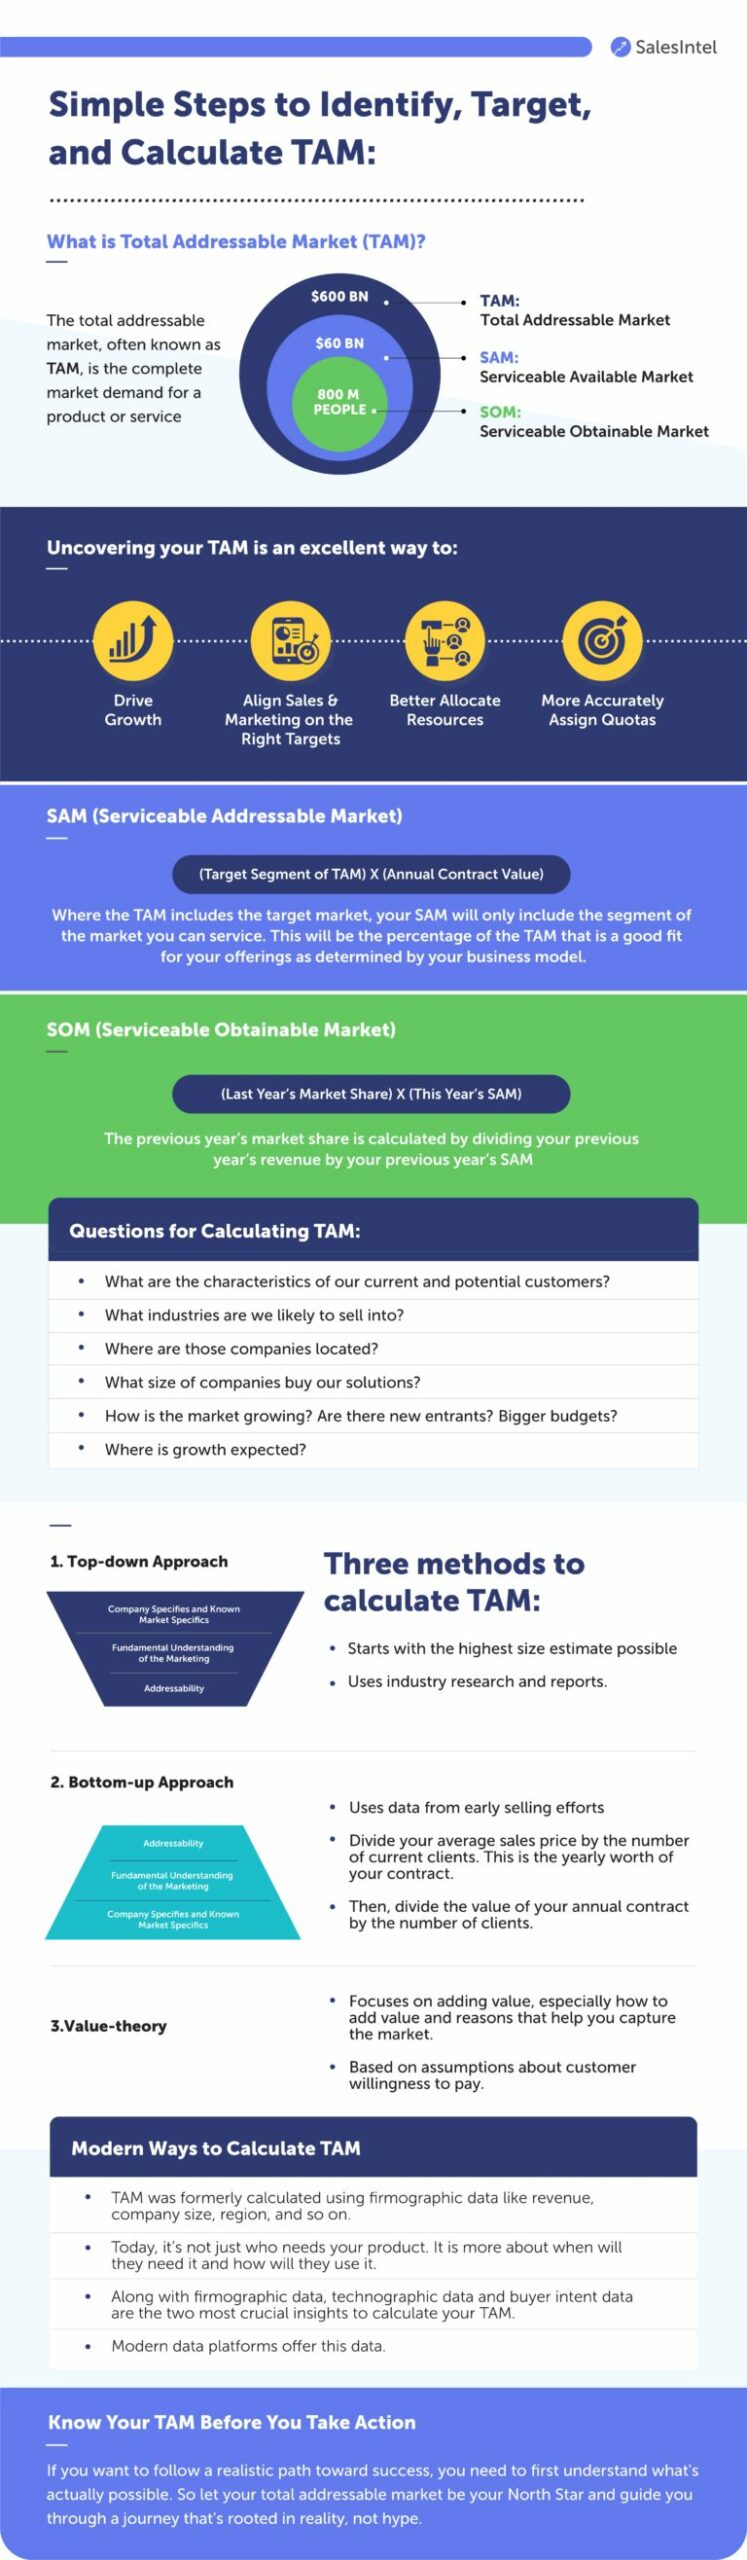 How to Calculate TAM, SAM, and SOM